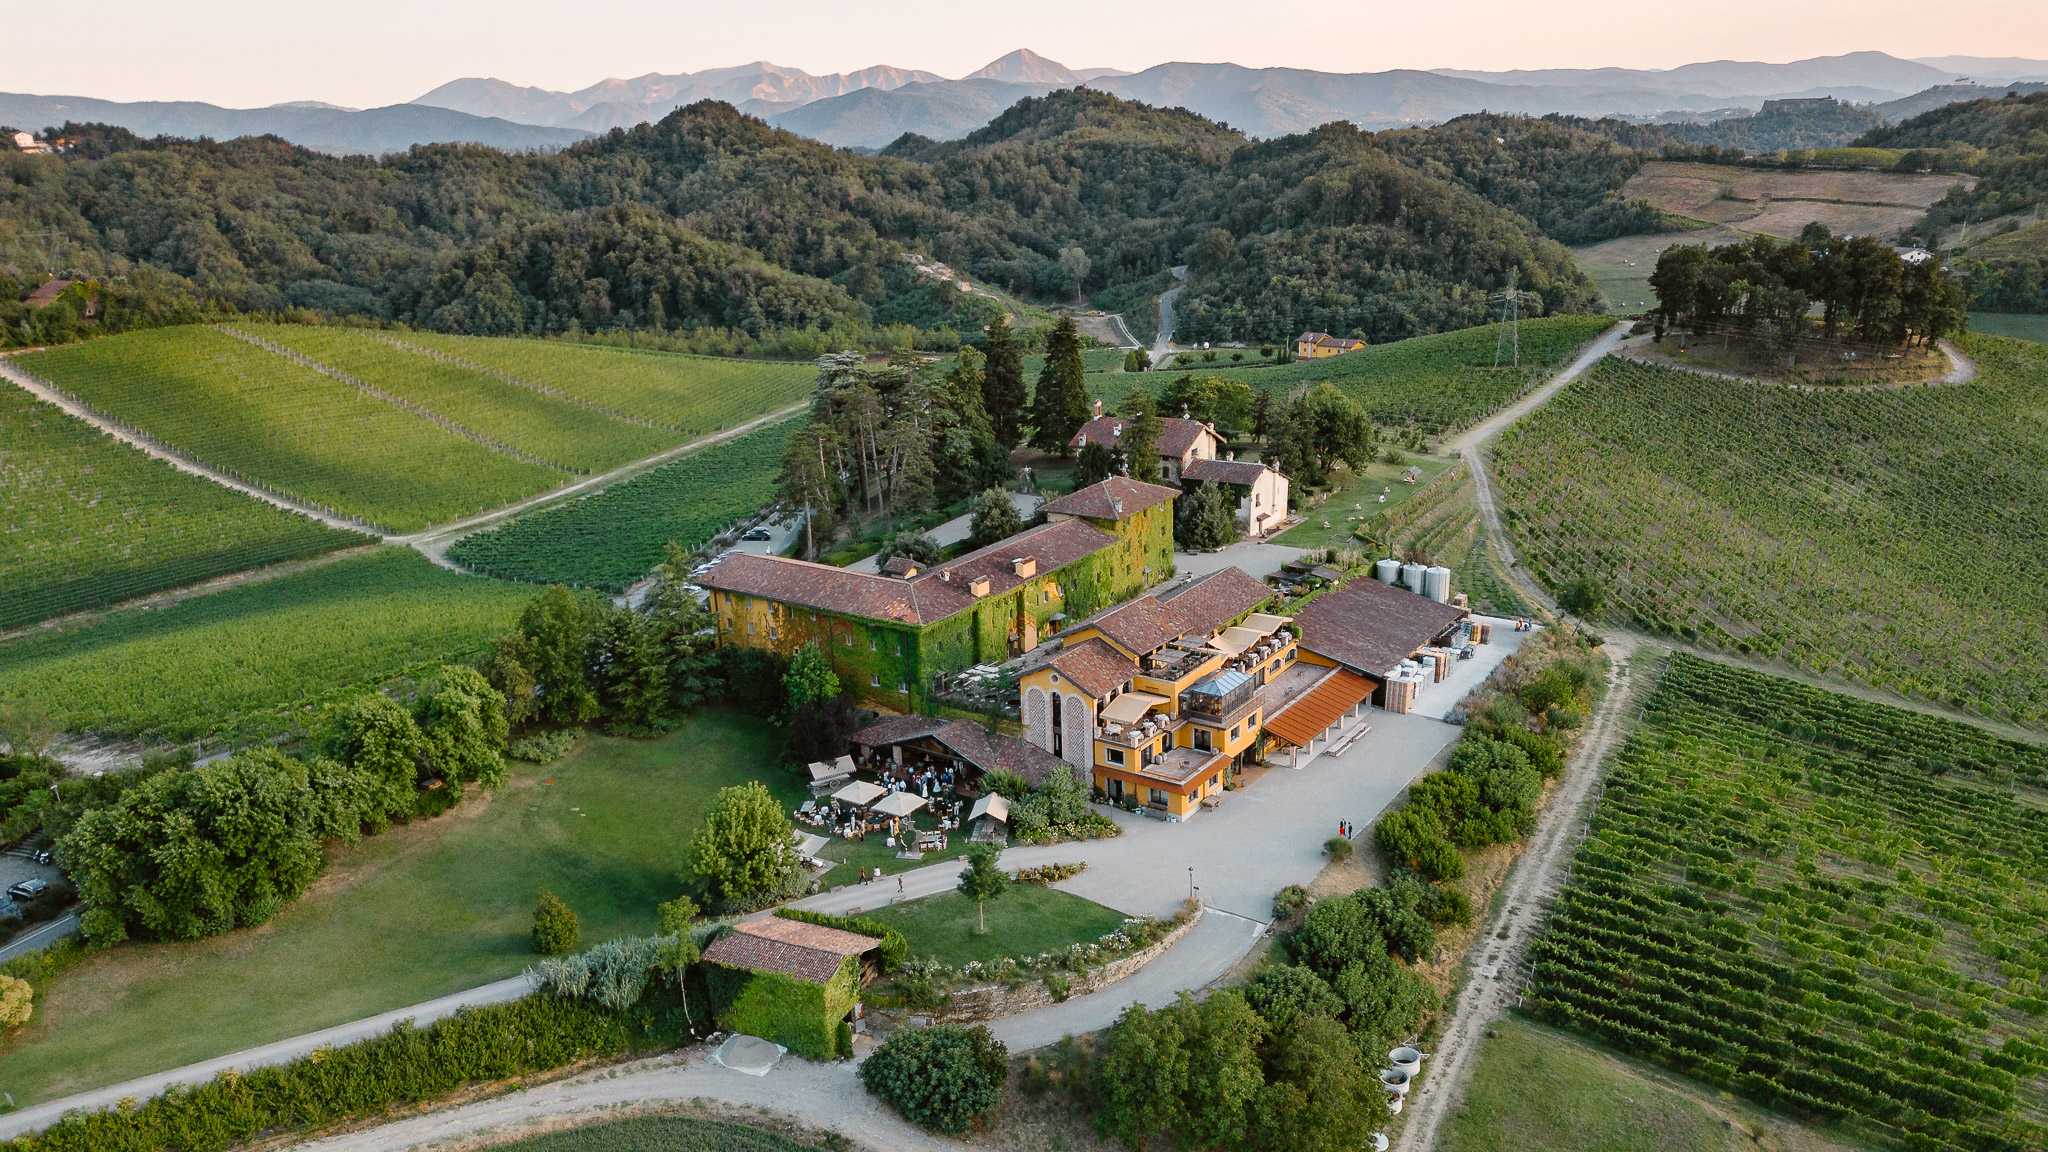 Villa Sparina from above, surrounded by mountains and vineyards. A perfect place for a wedding